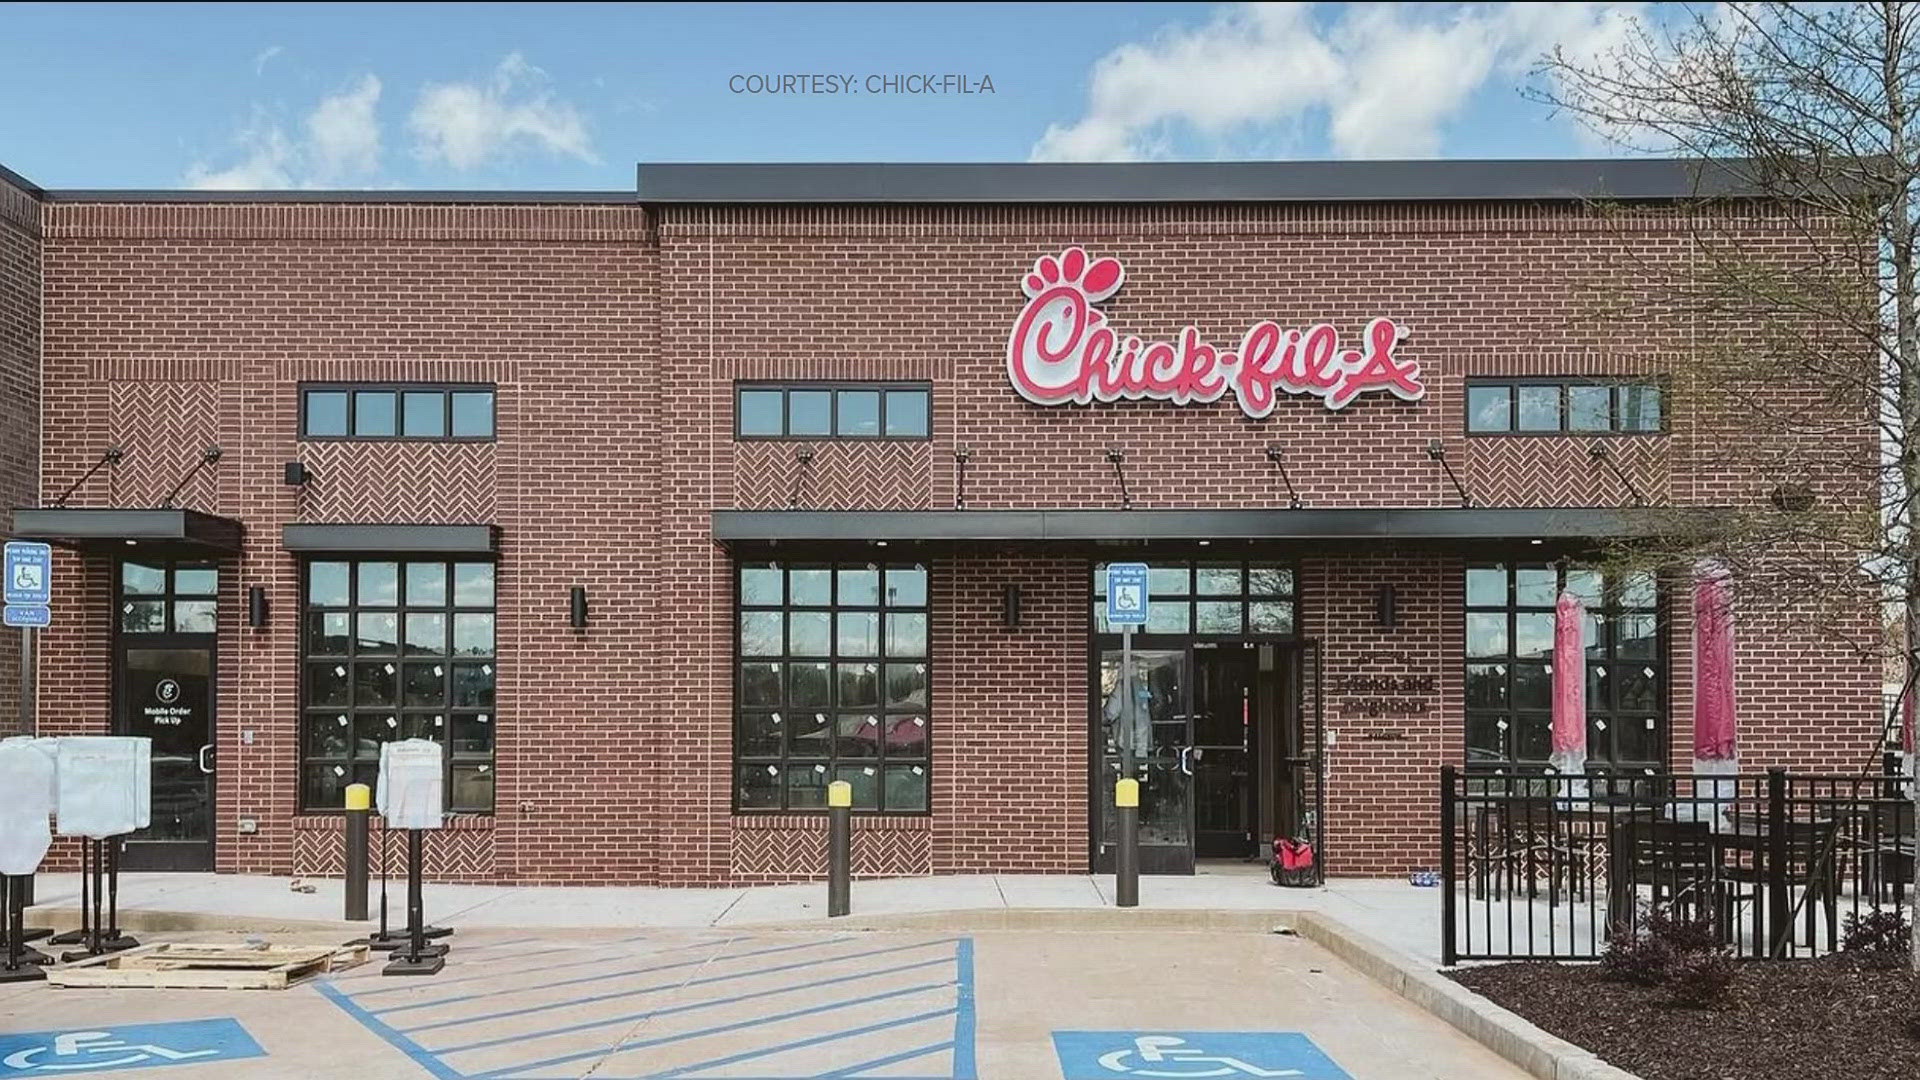 According to a Chick-fil-A news release, the Halcyon location will be locally operated by Colby Cameron, a Snellville native and independent franchise owner.